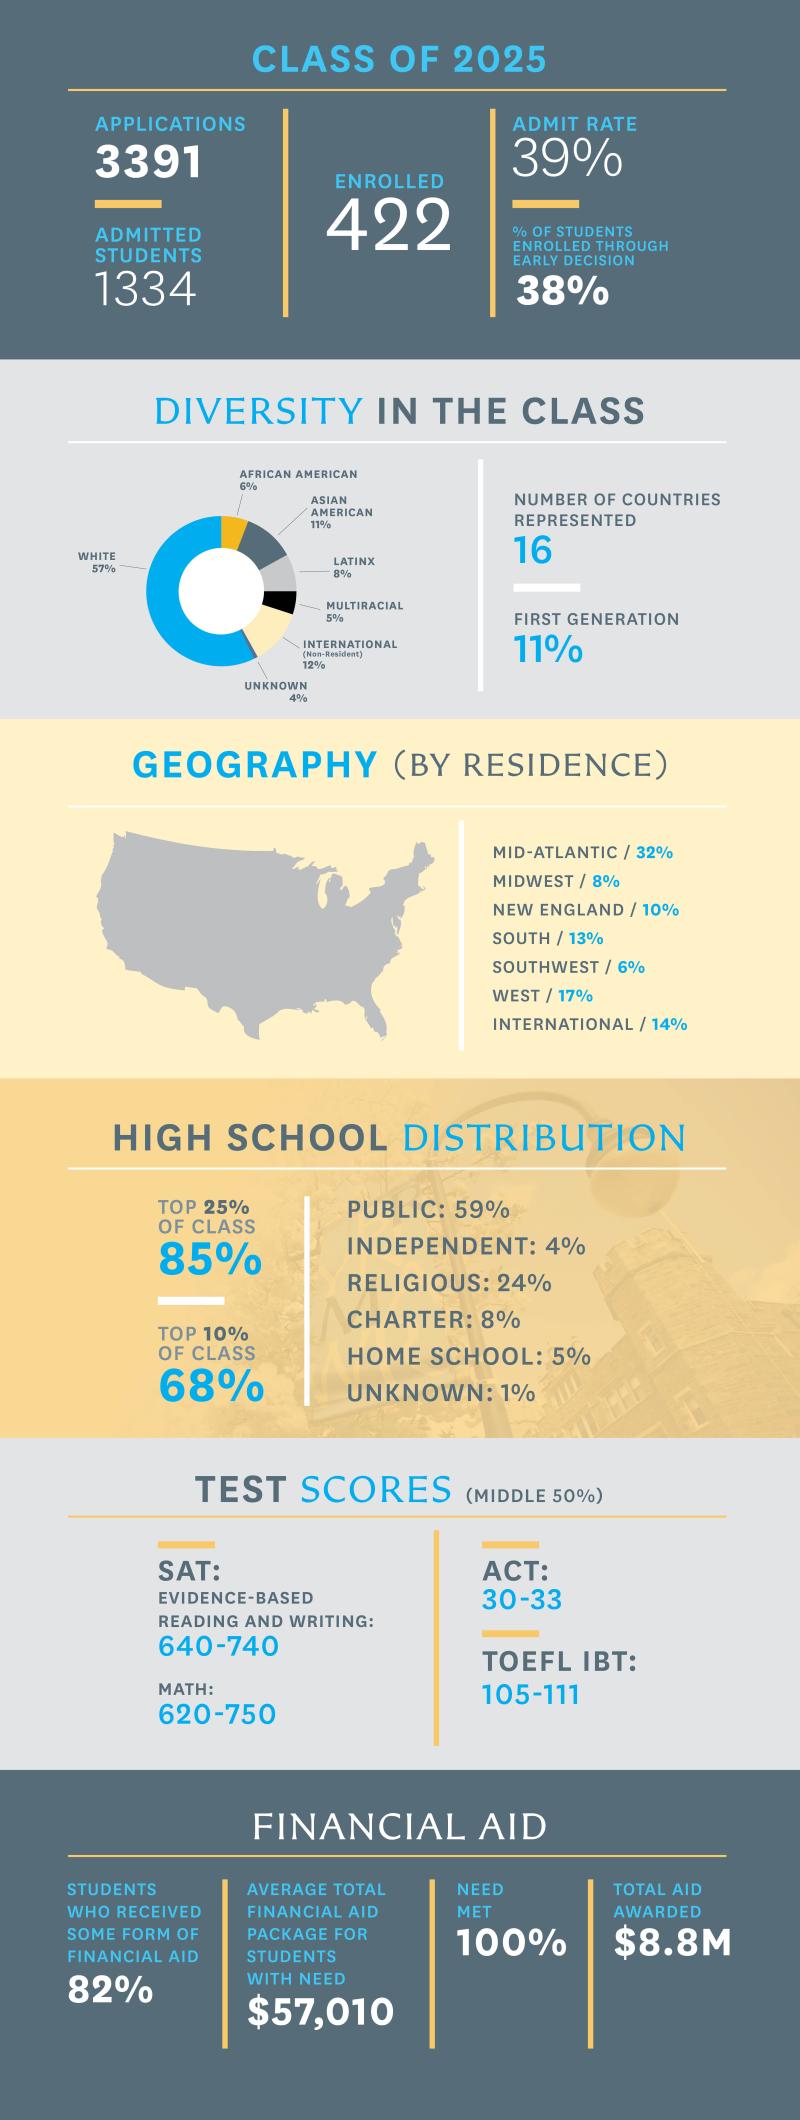 Class of 2025 Infographic